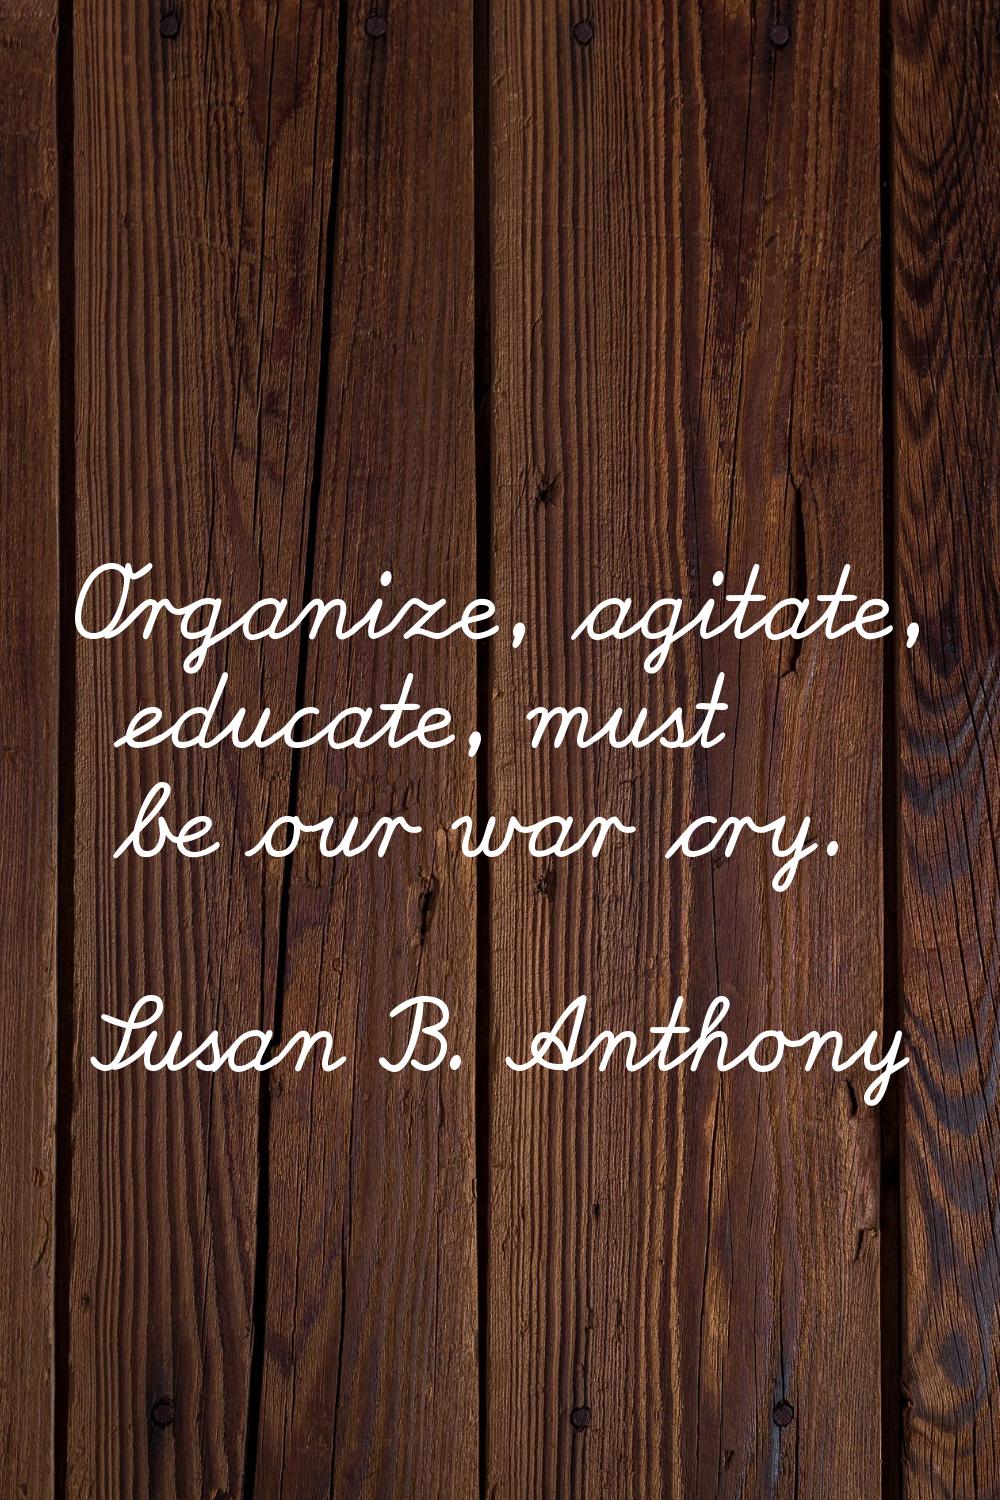 Organize, agitate, educate, must be our war cry.